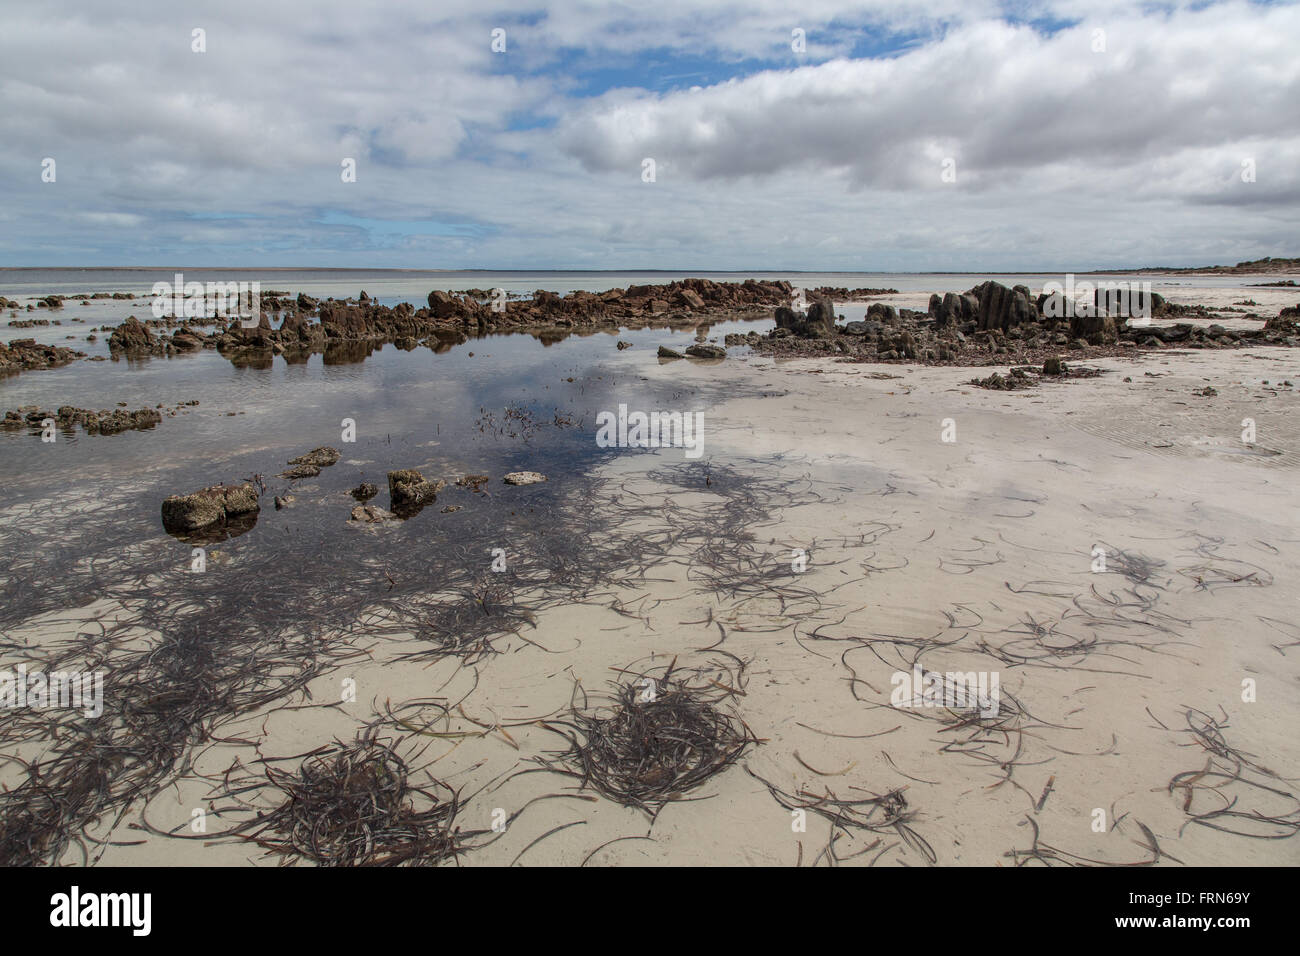 seaweed and lines of rocks in shallow water of sandy beach Stock Photo